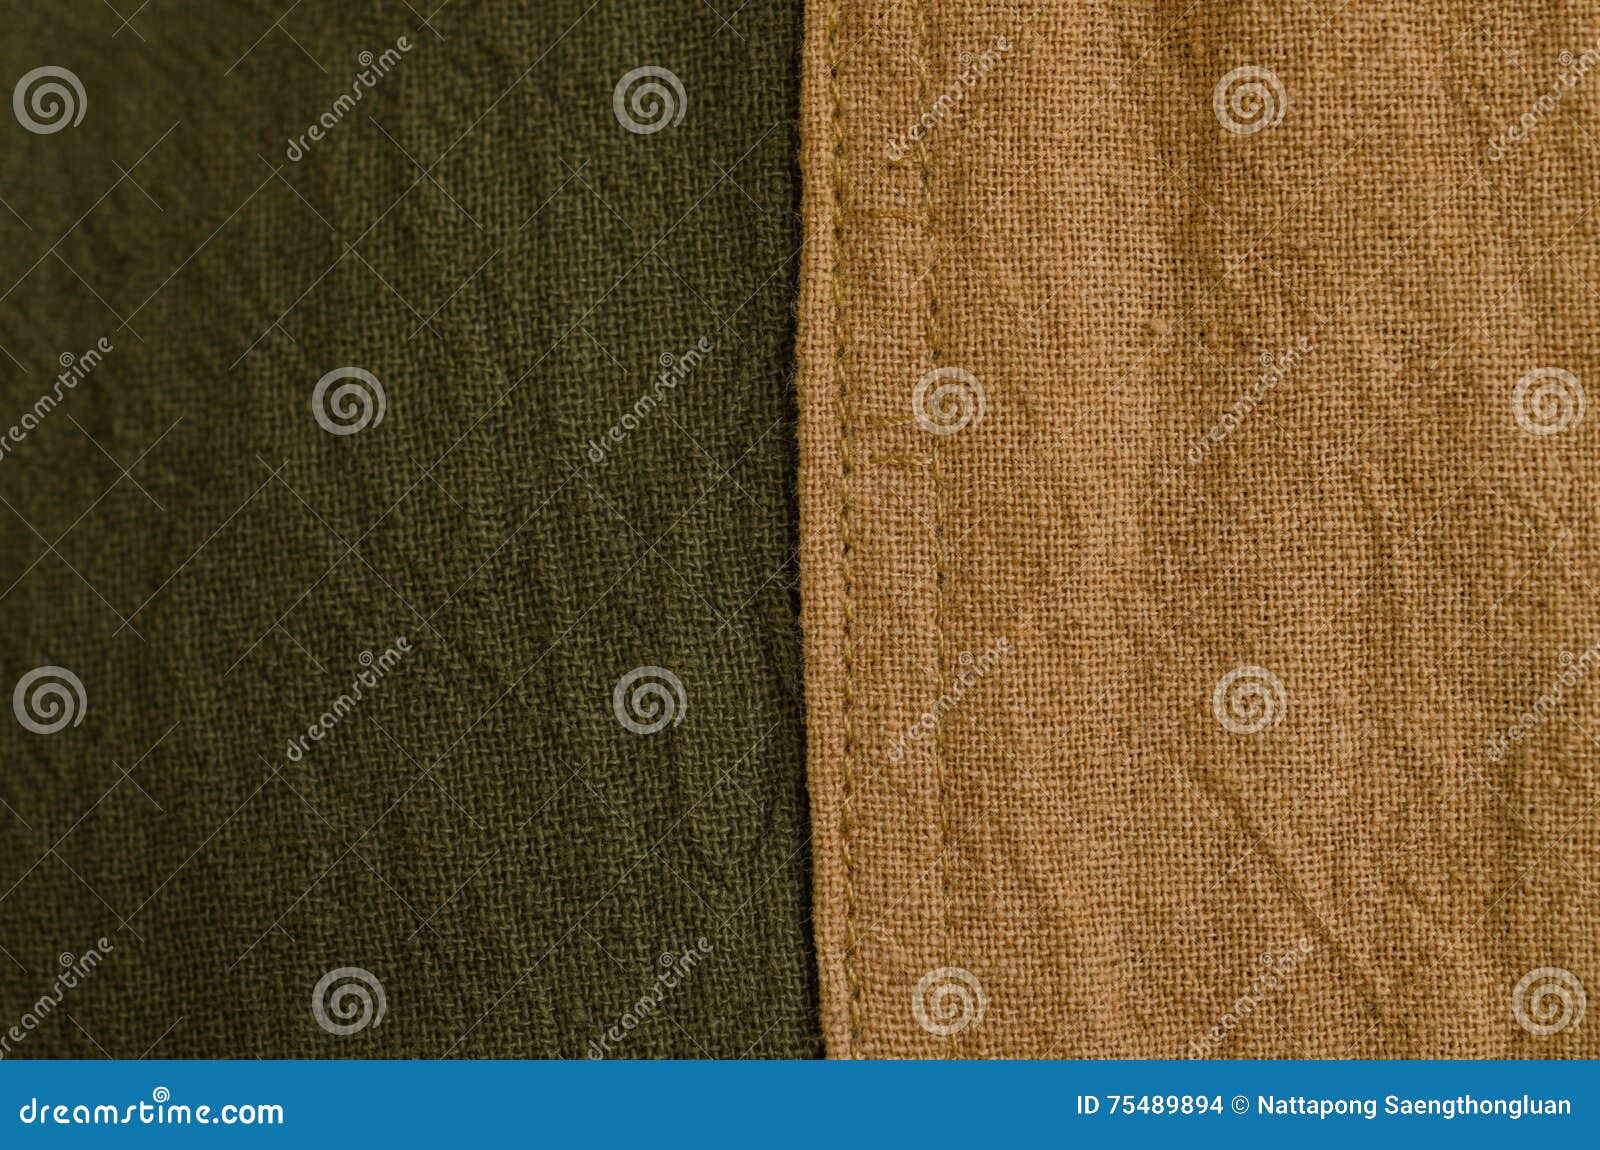 Texture of Brown and Green Natural Dye Fabric. Selective Focus